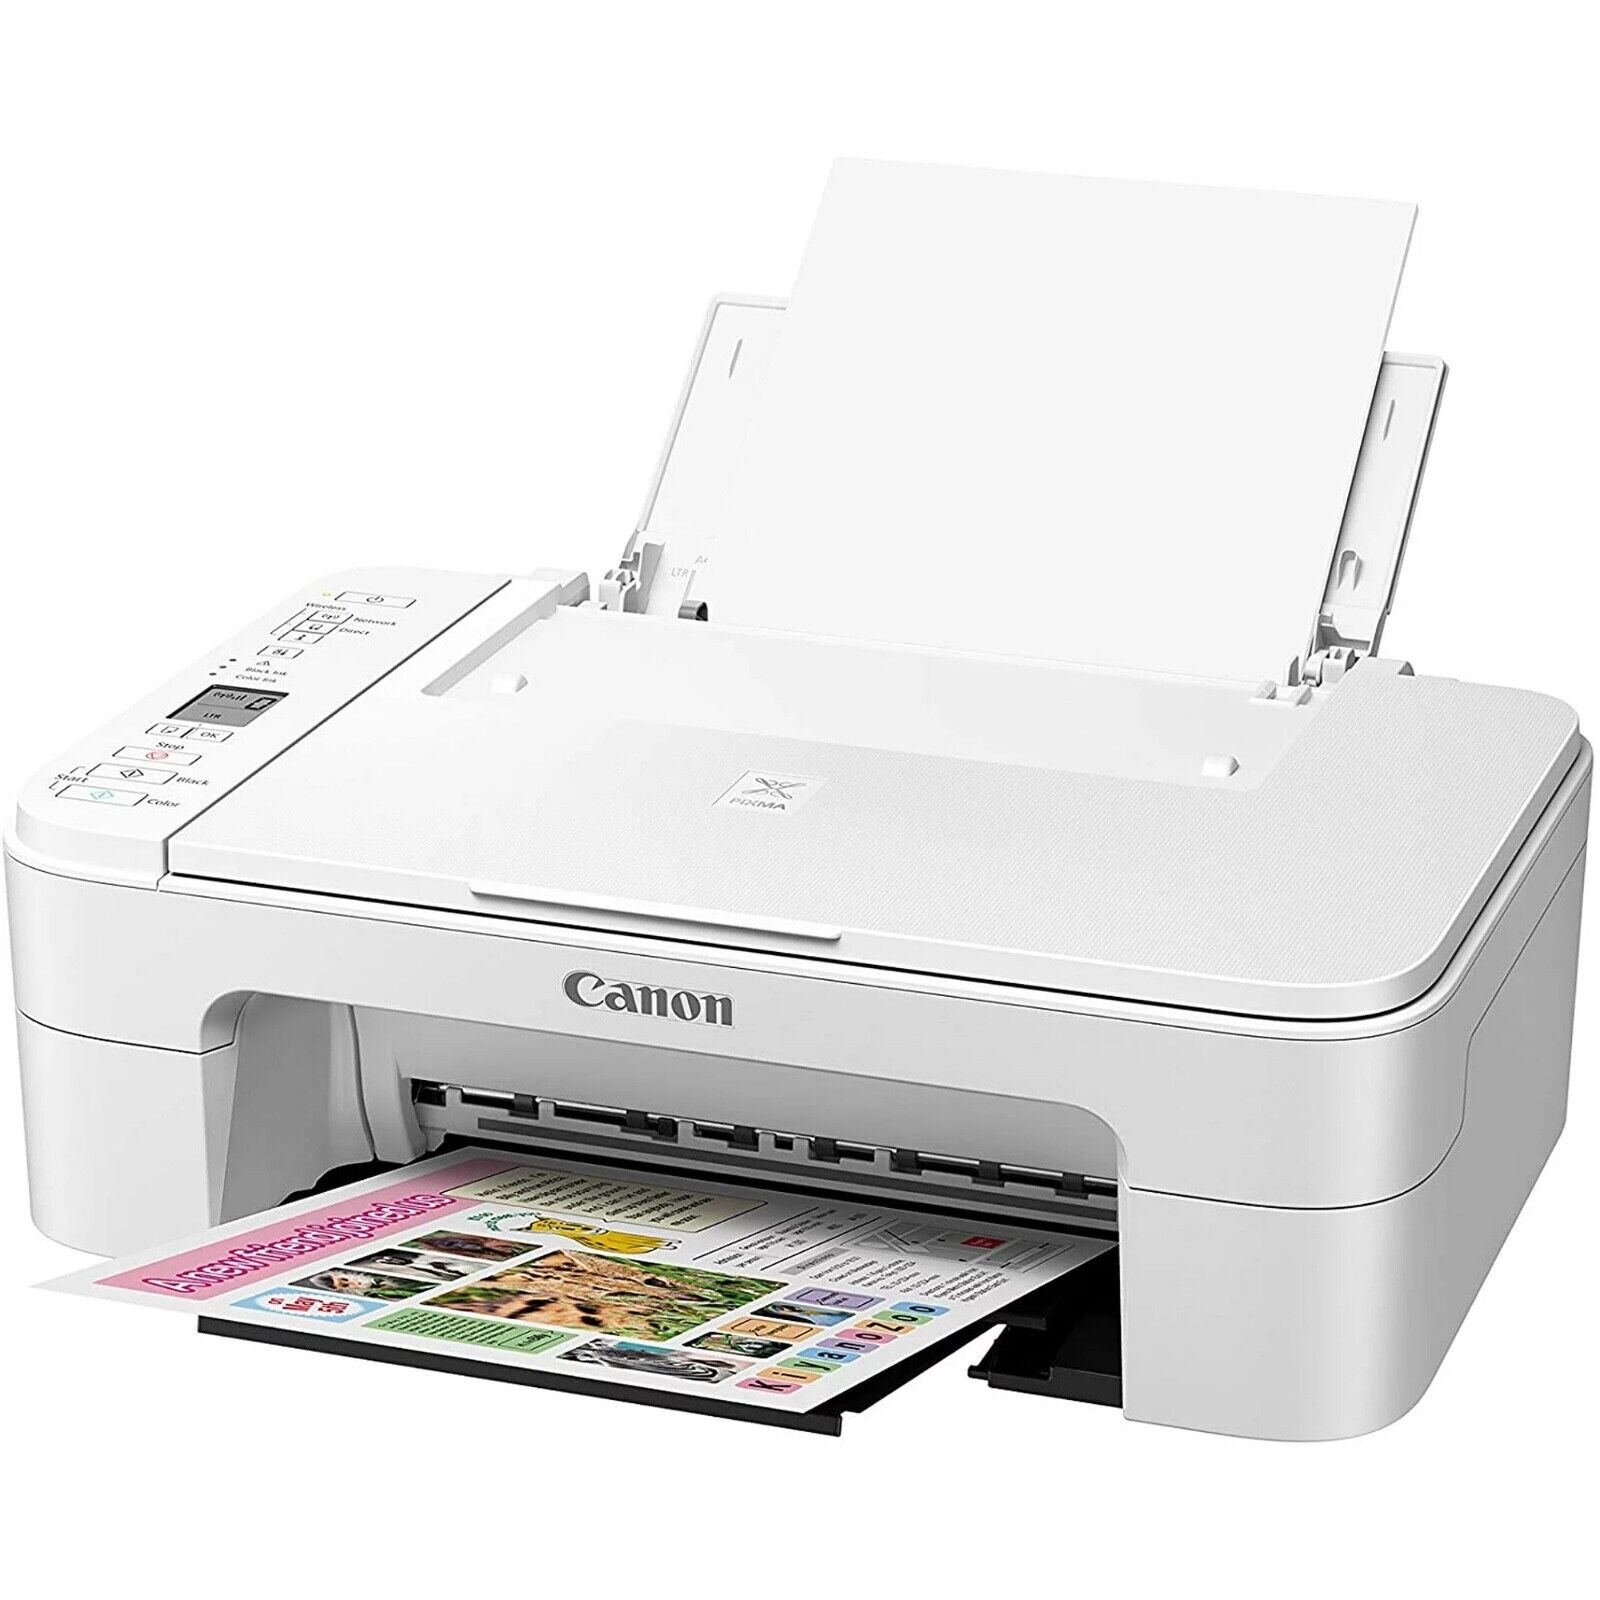 Canon Pixma TS3122 Wireless Printer Scanner New Sealed  All-in-one